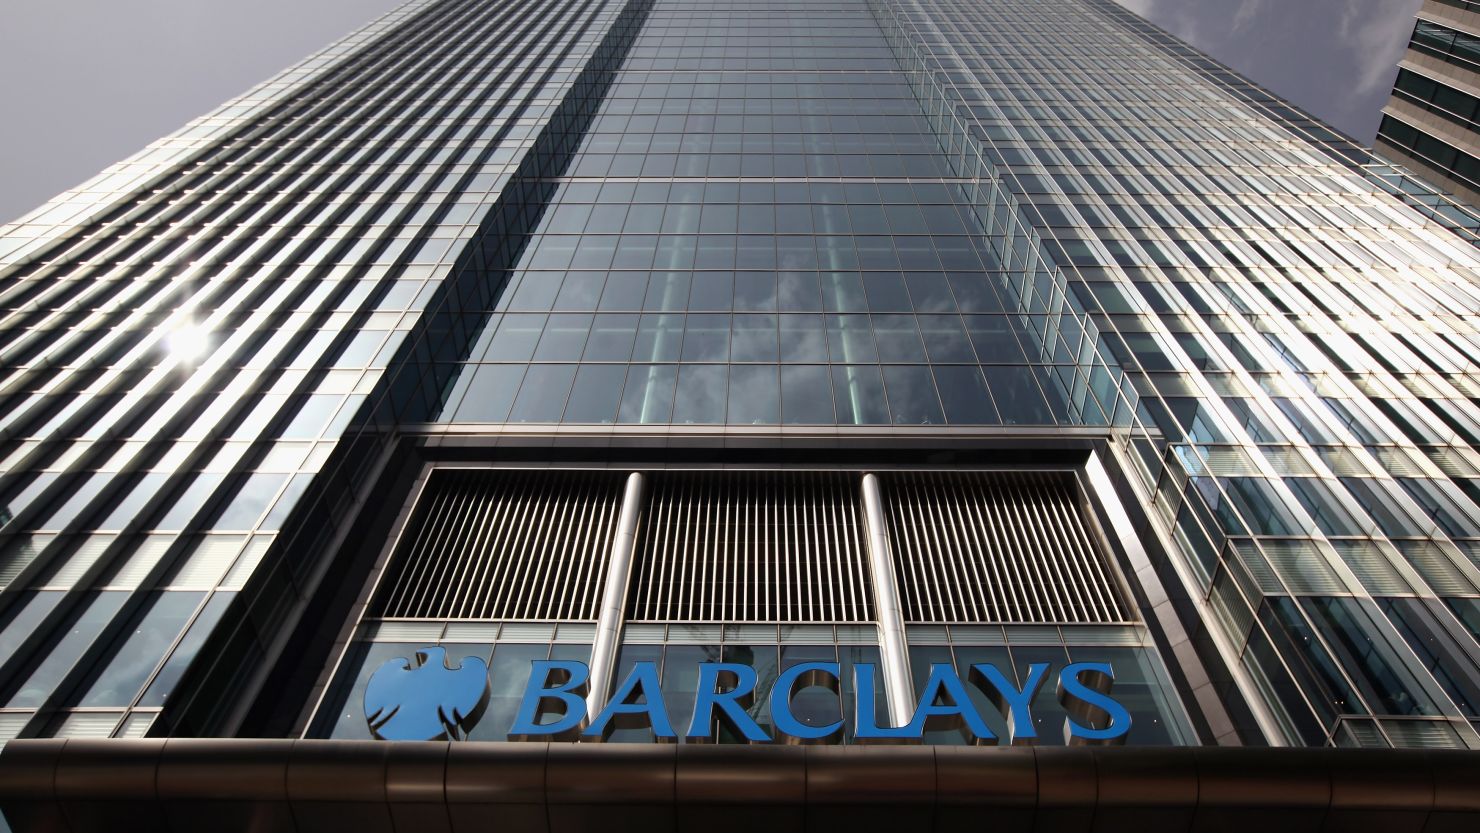 Barclays Bank was fined  £290 million for manipulating the Libor inter-bank lending rate